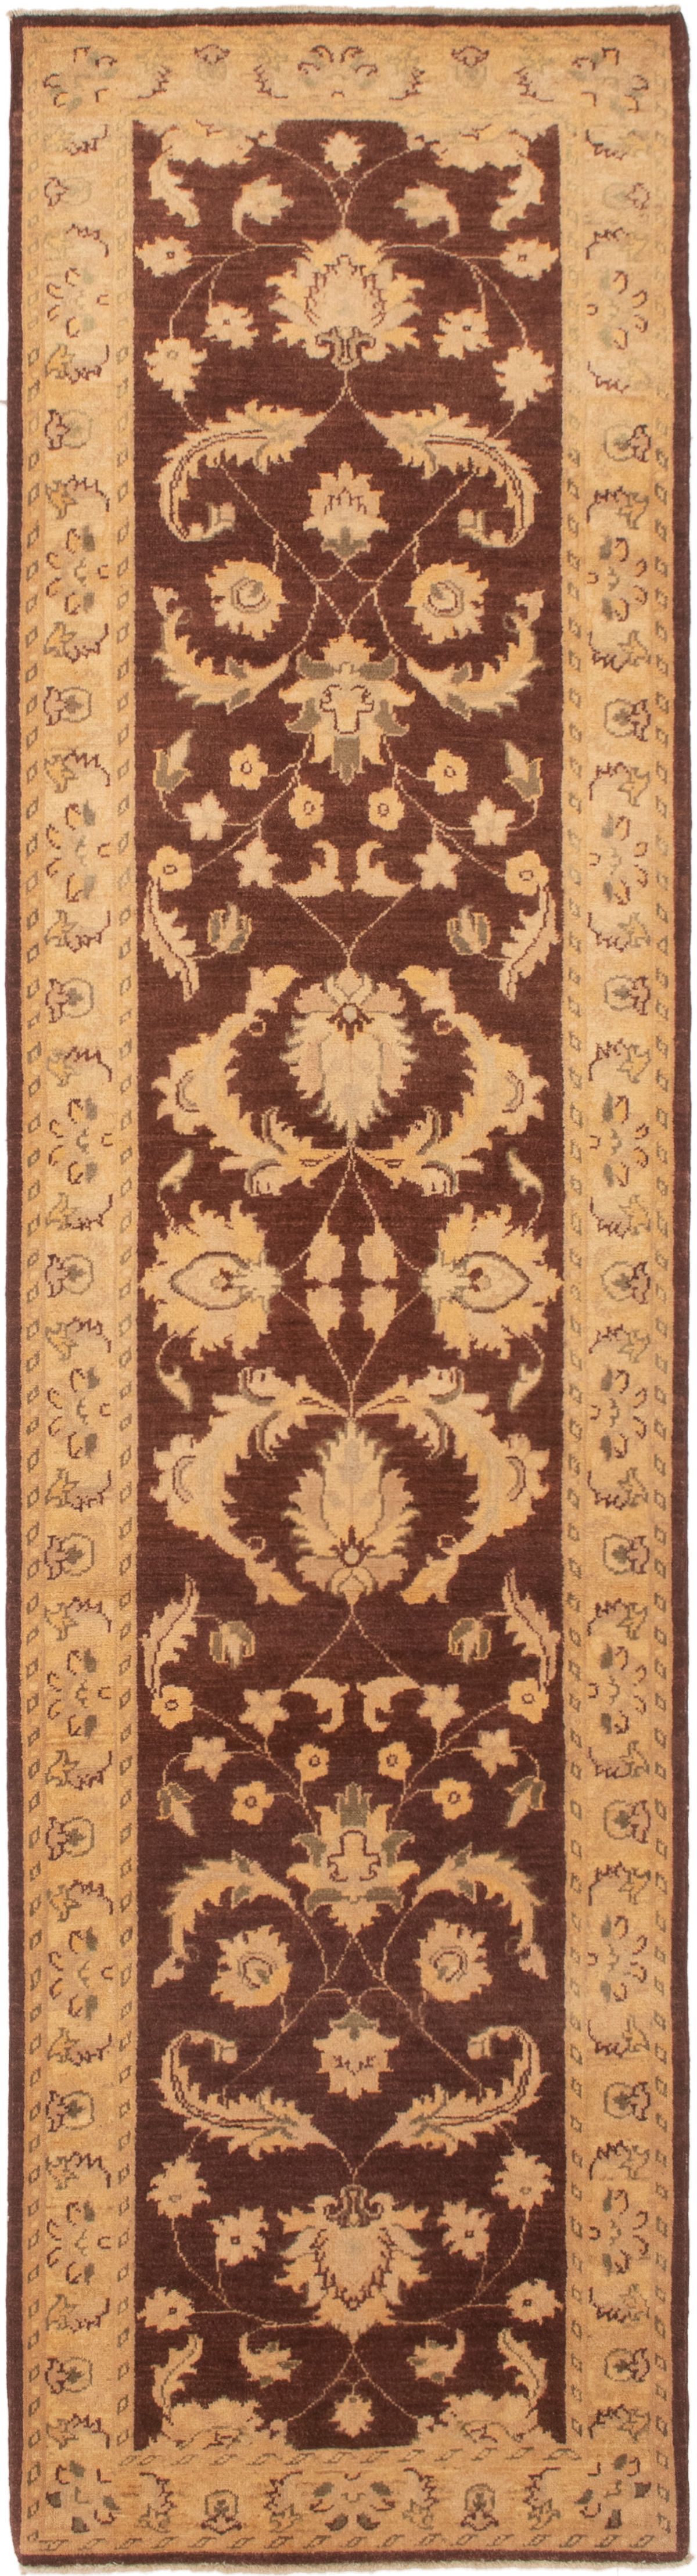 Hand-knotted Chobi Finest Brown, Cream Wool Rug 2'9" x 10'8" Size: 2'9" x 10'8"  